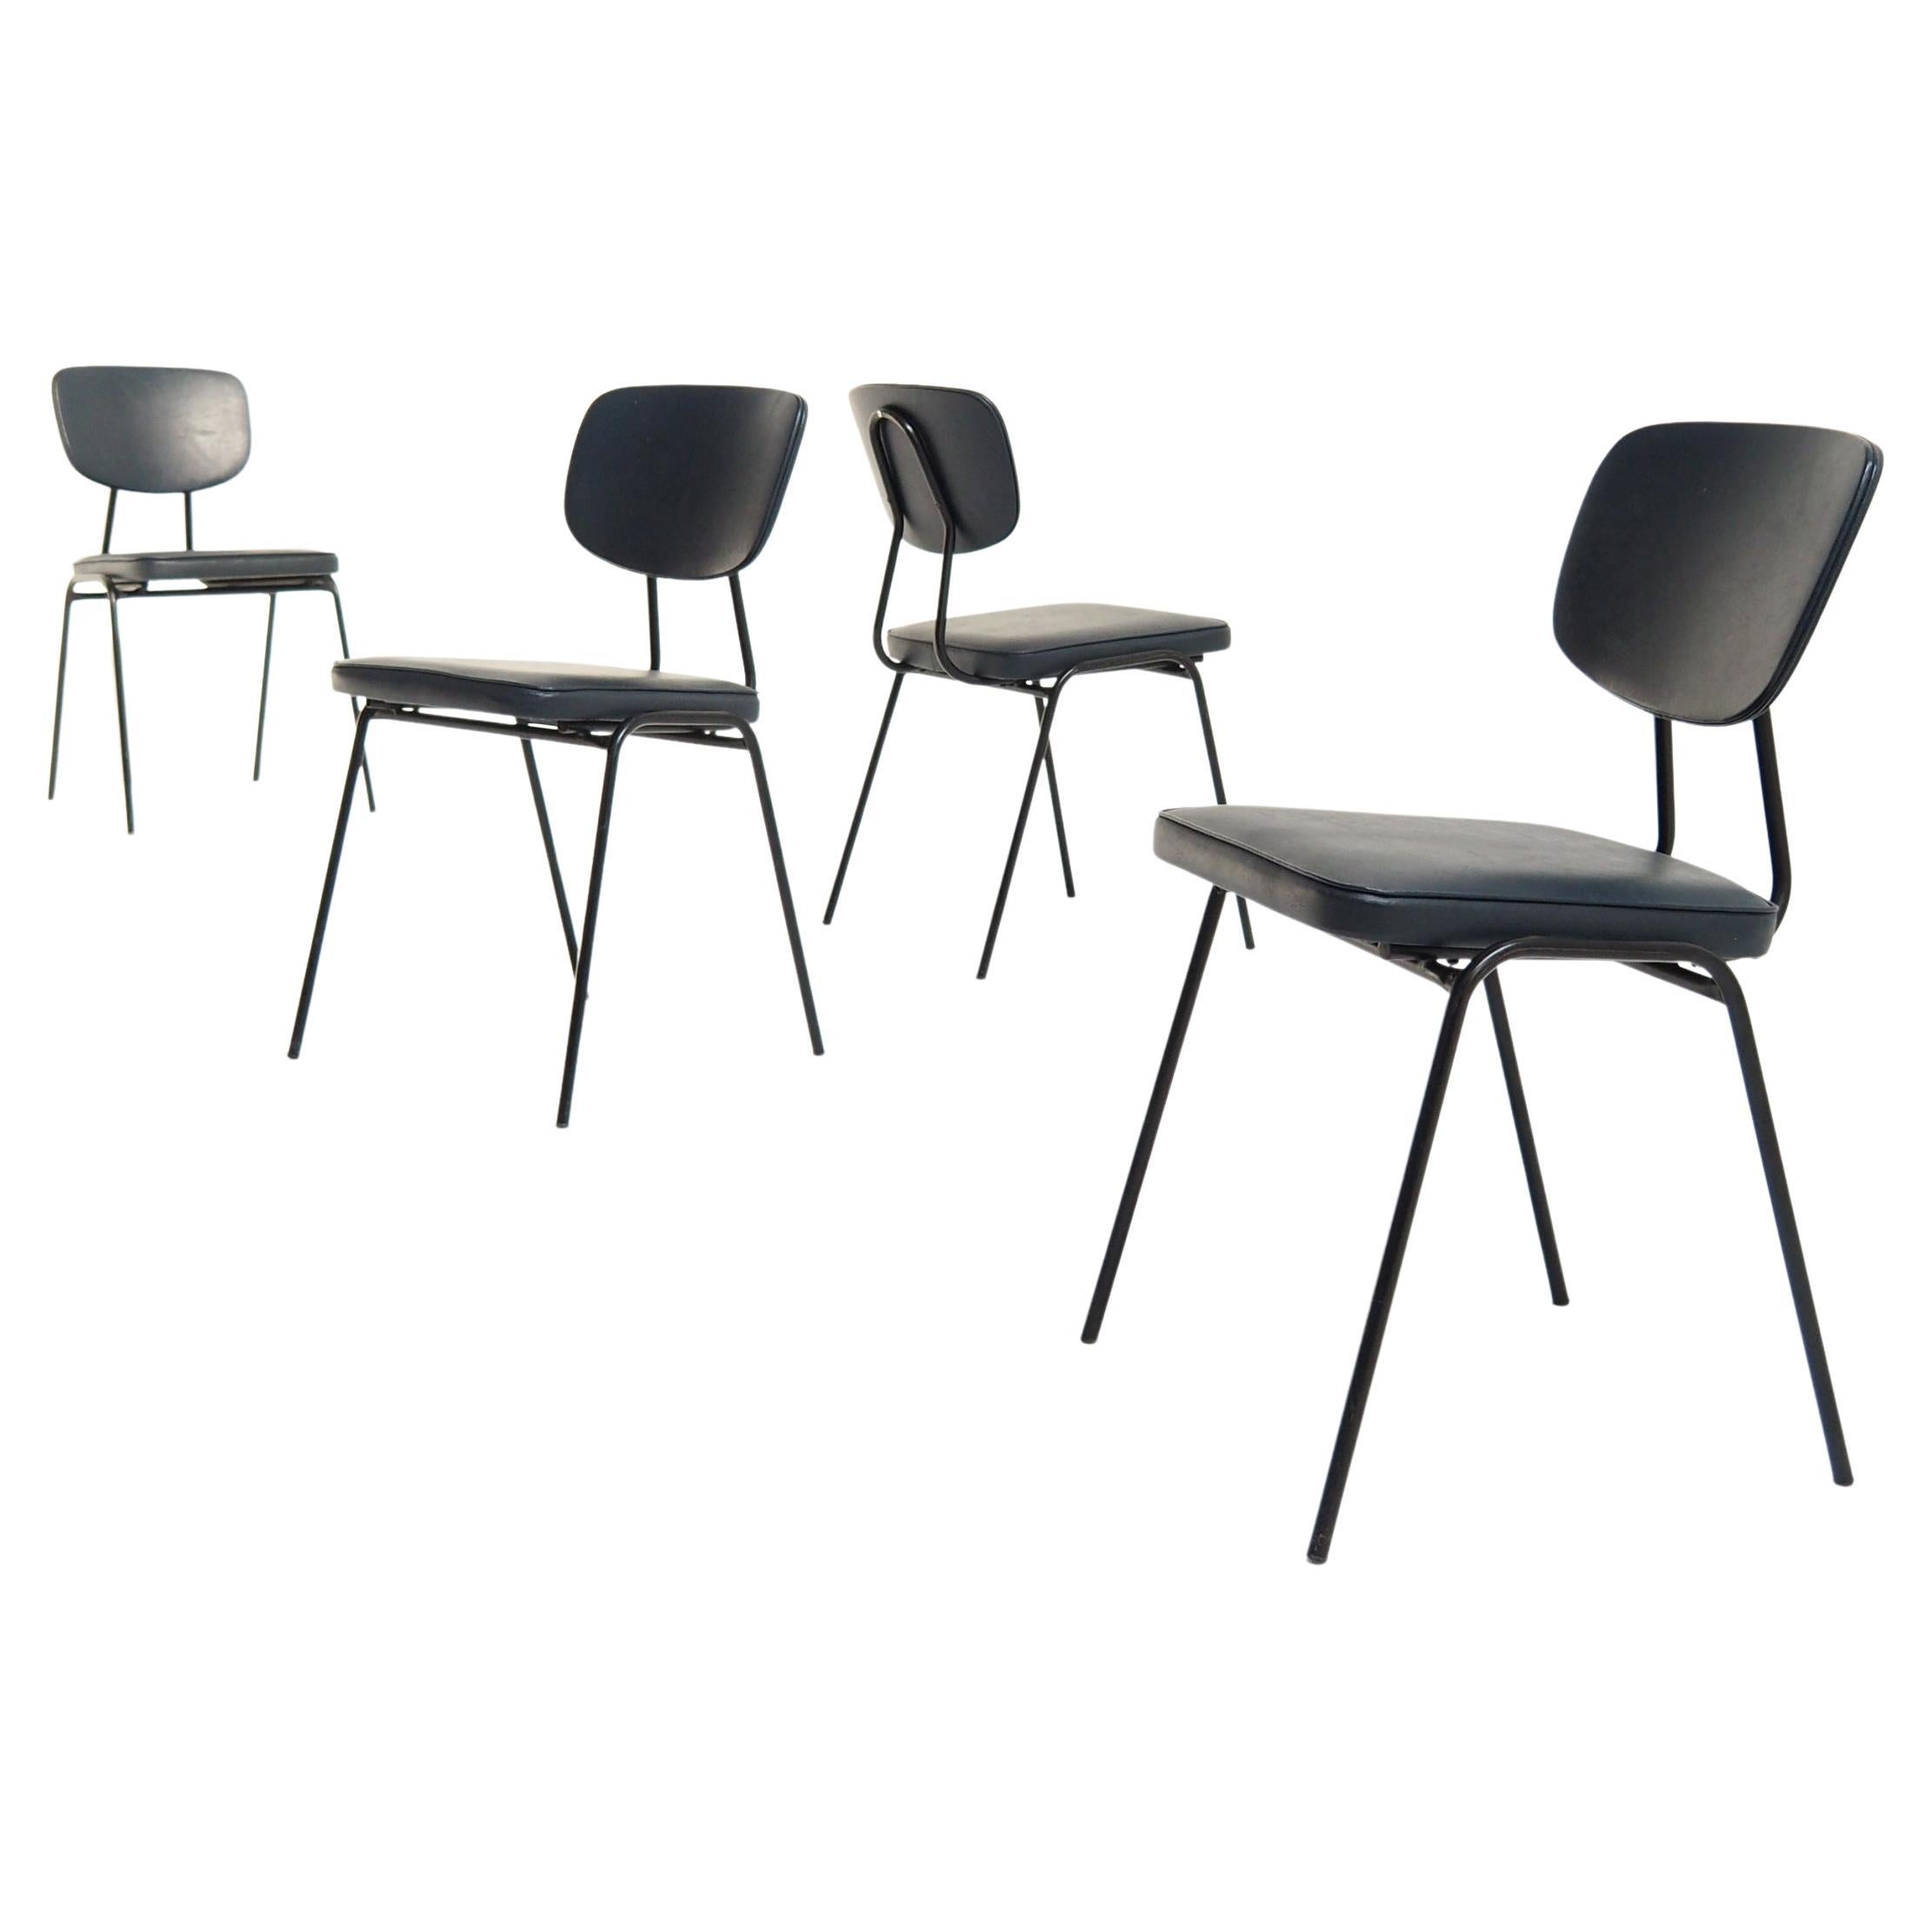 Set of 4 Model ‘CM’ Chairs by Pierre Guariche for Meurop, 1960s